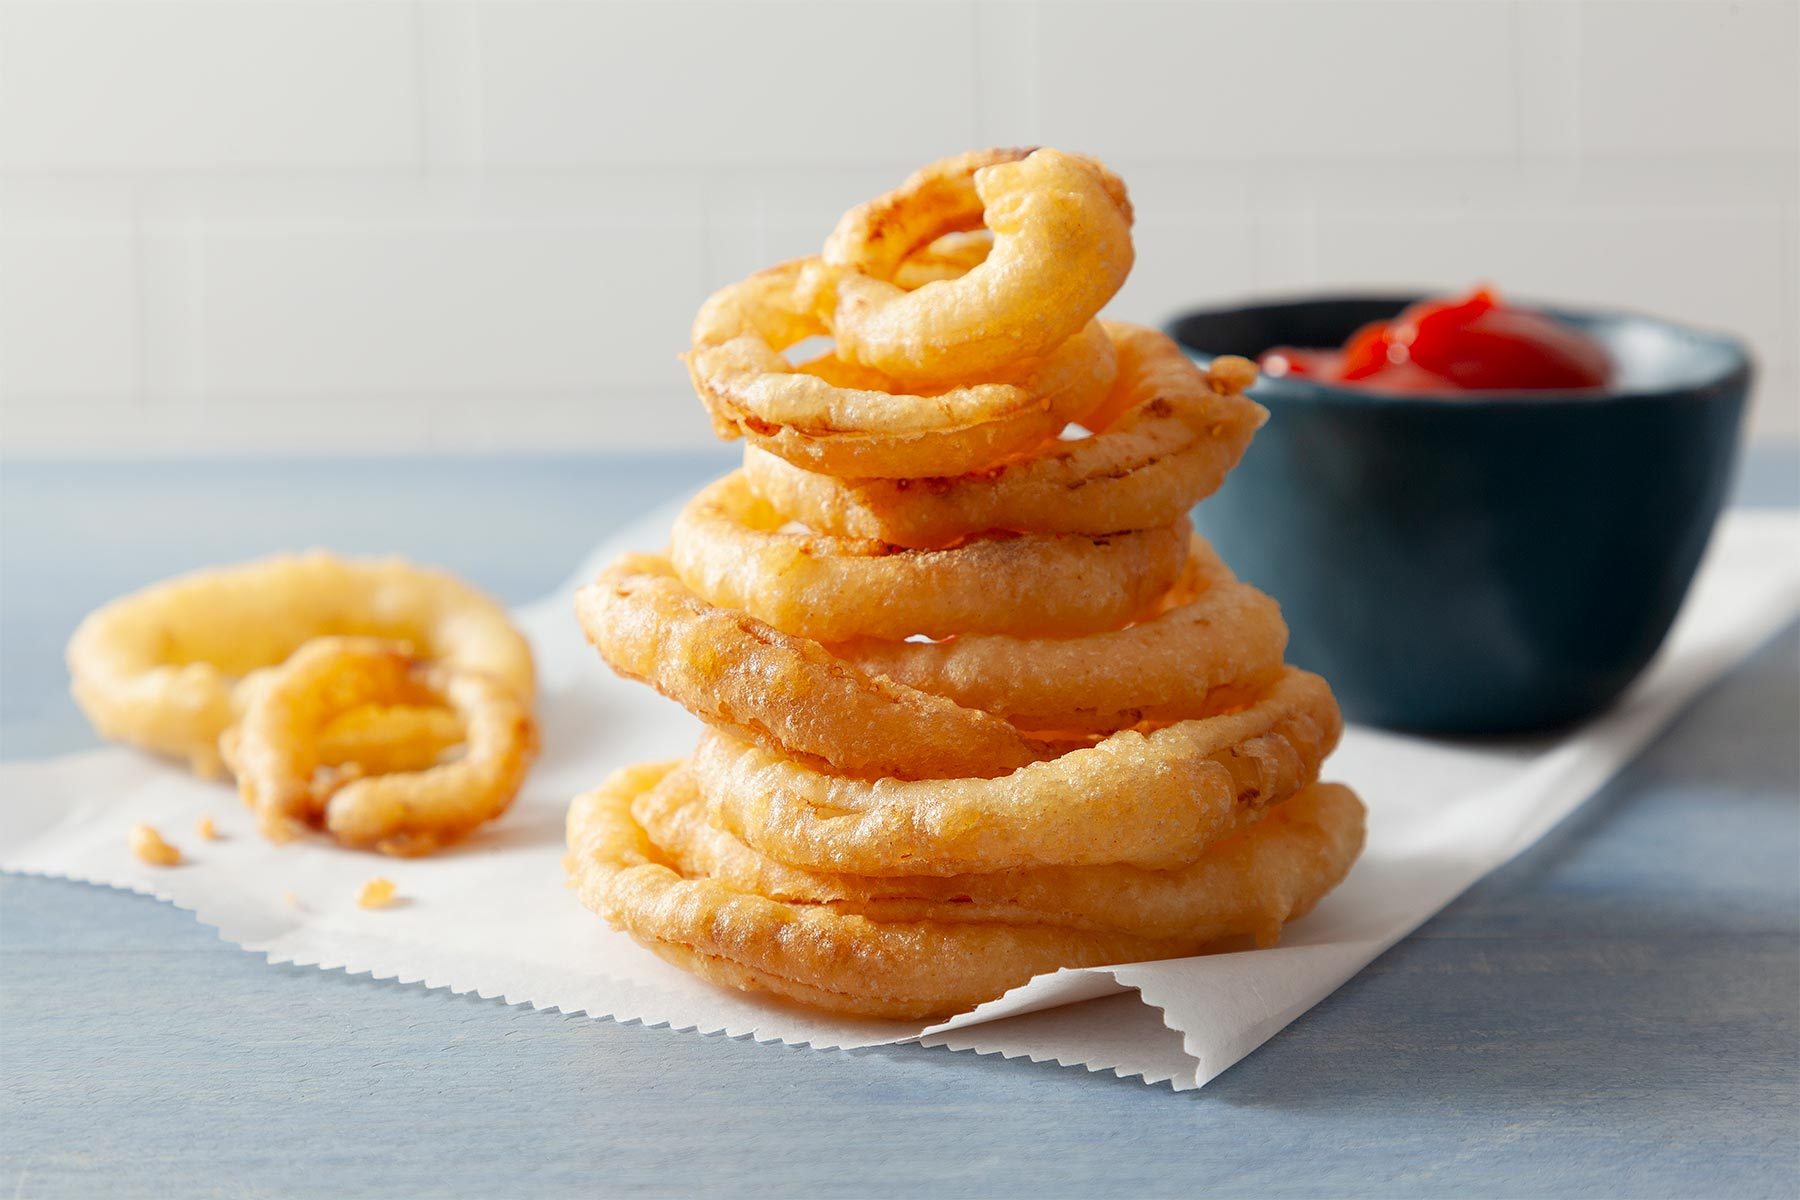 Table view shot of Crispy Fried Onion Rings; served on paper tissue with ketchup; light blue wooden background;